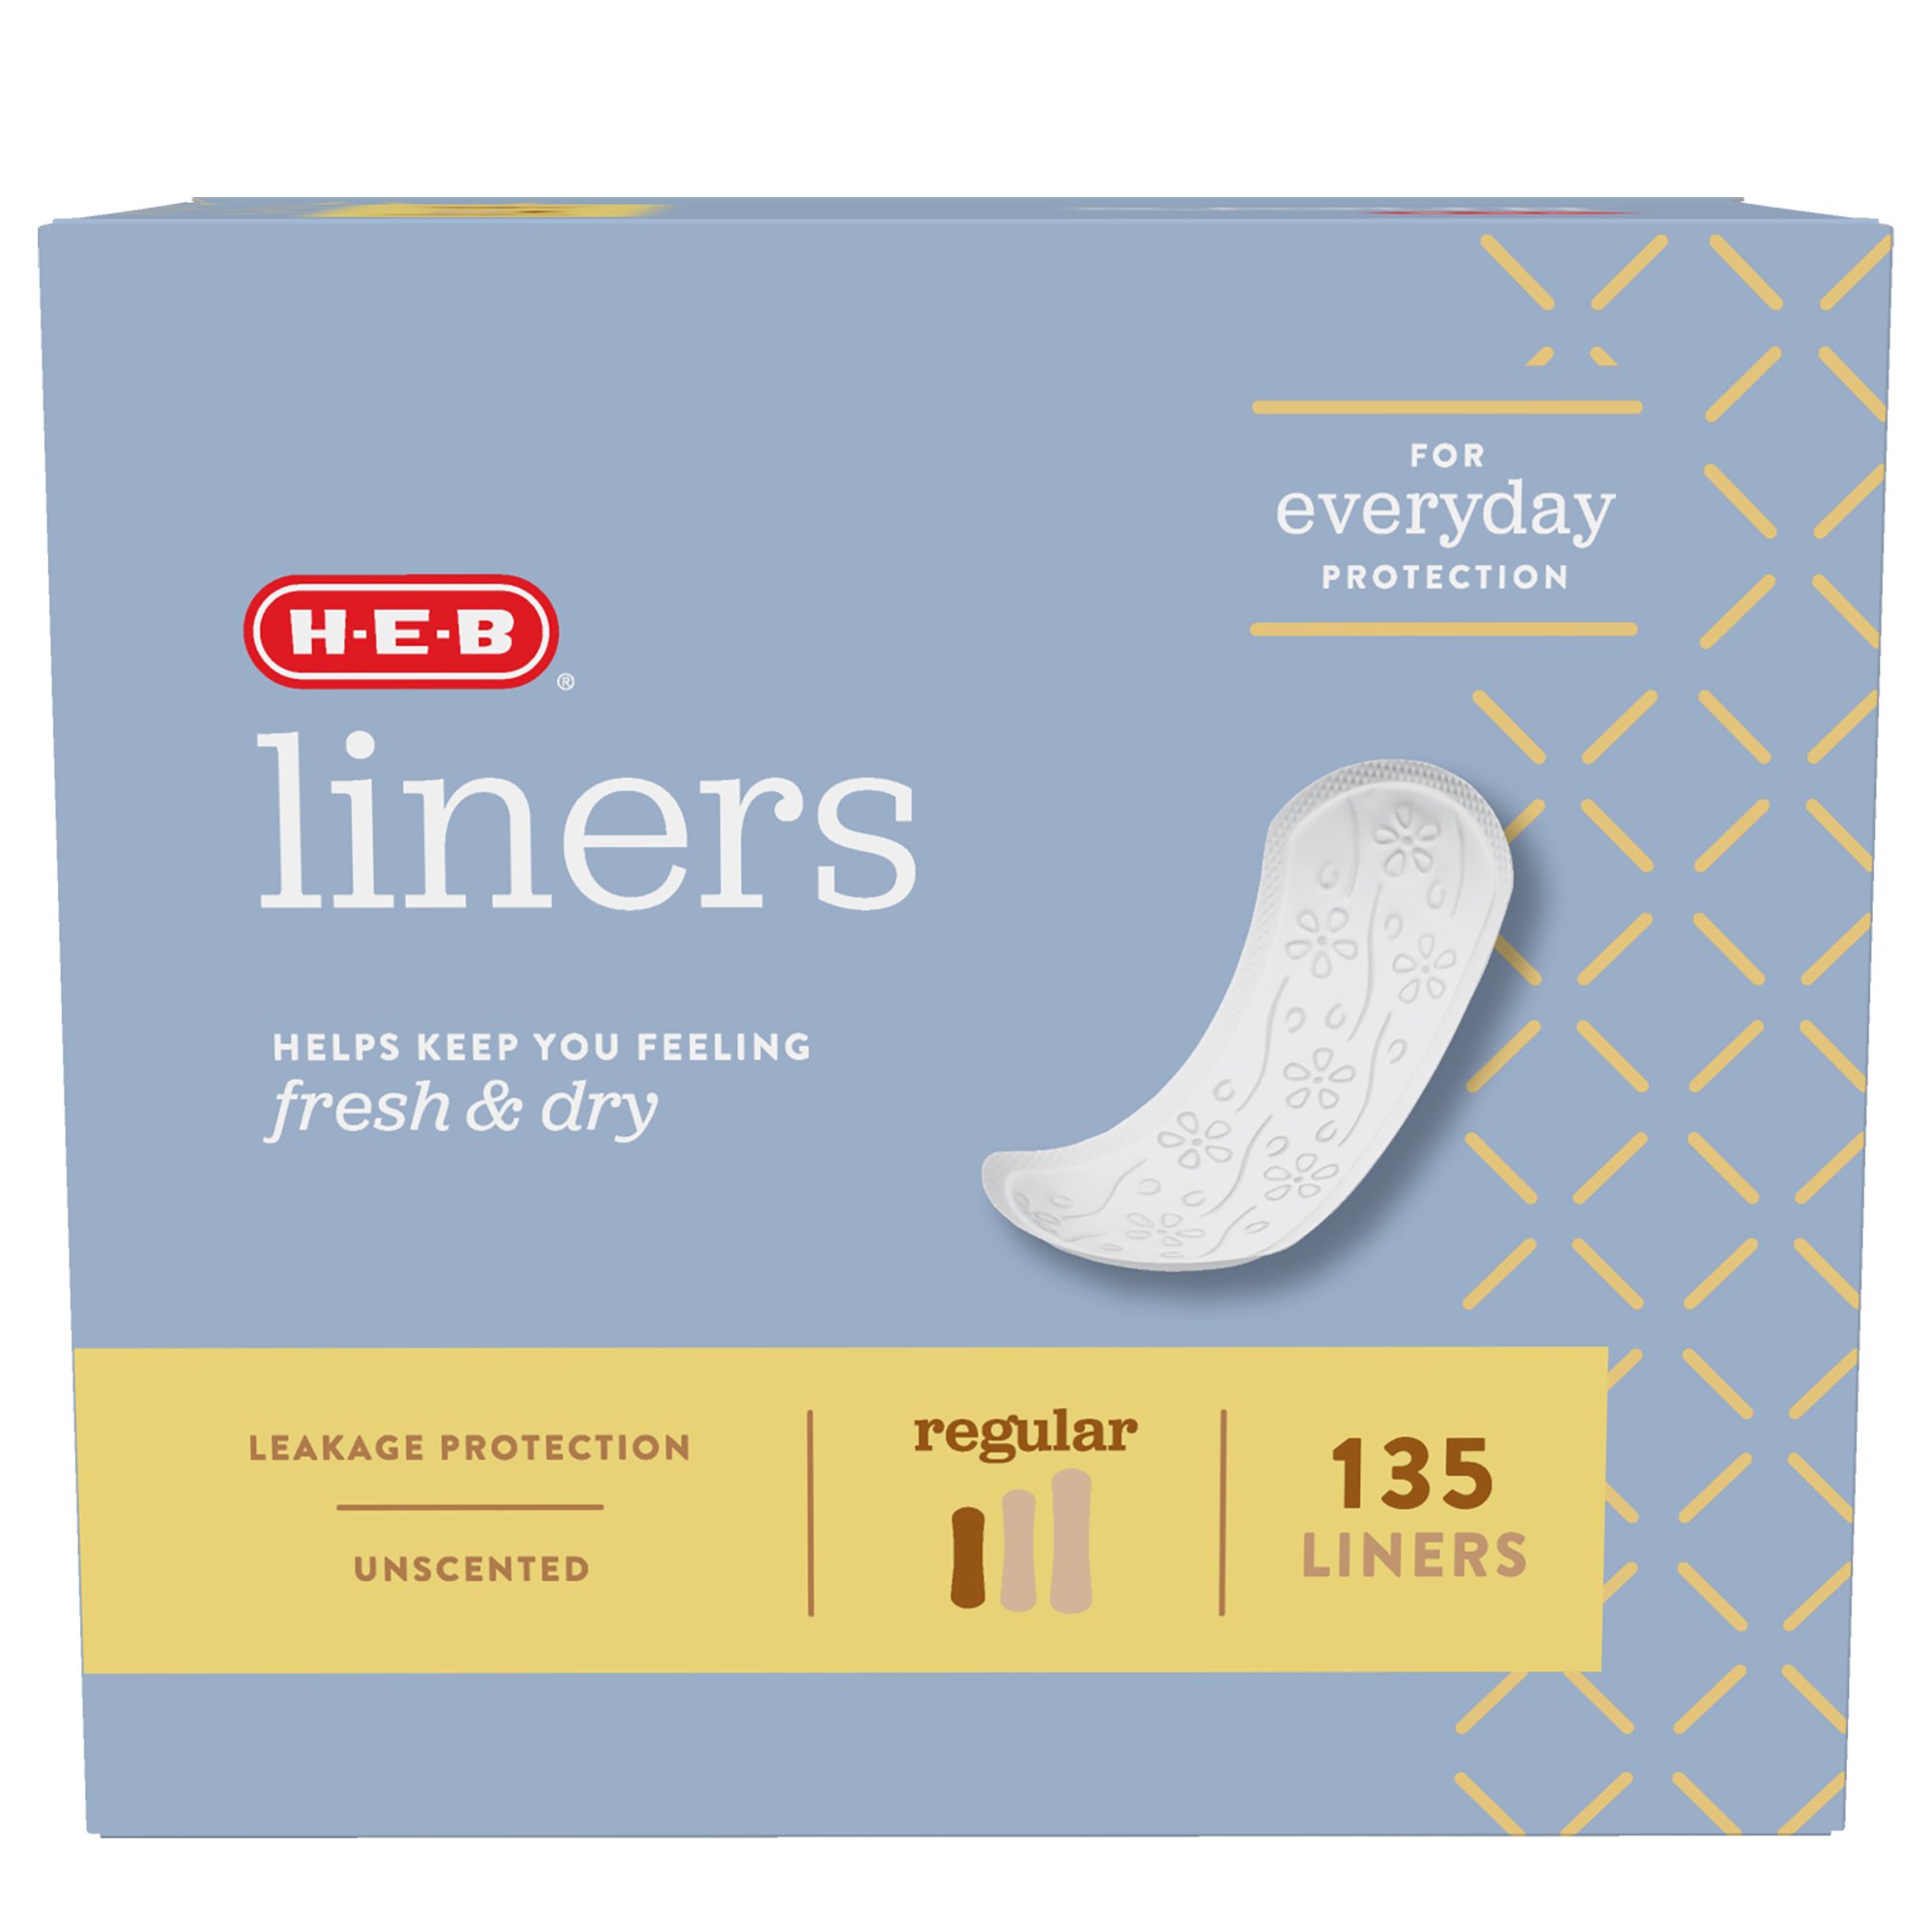 Unders by Proof Women's Light Absorbency Period Underwear - Shop Pads &  Liners at H-E-B